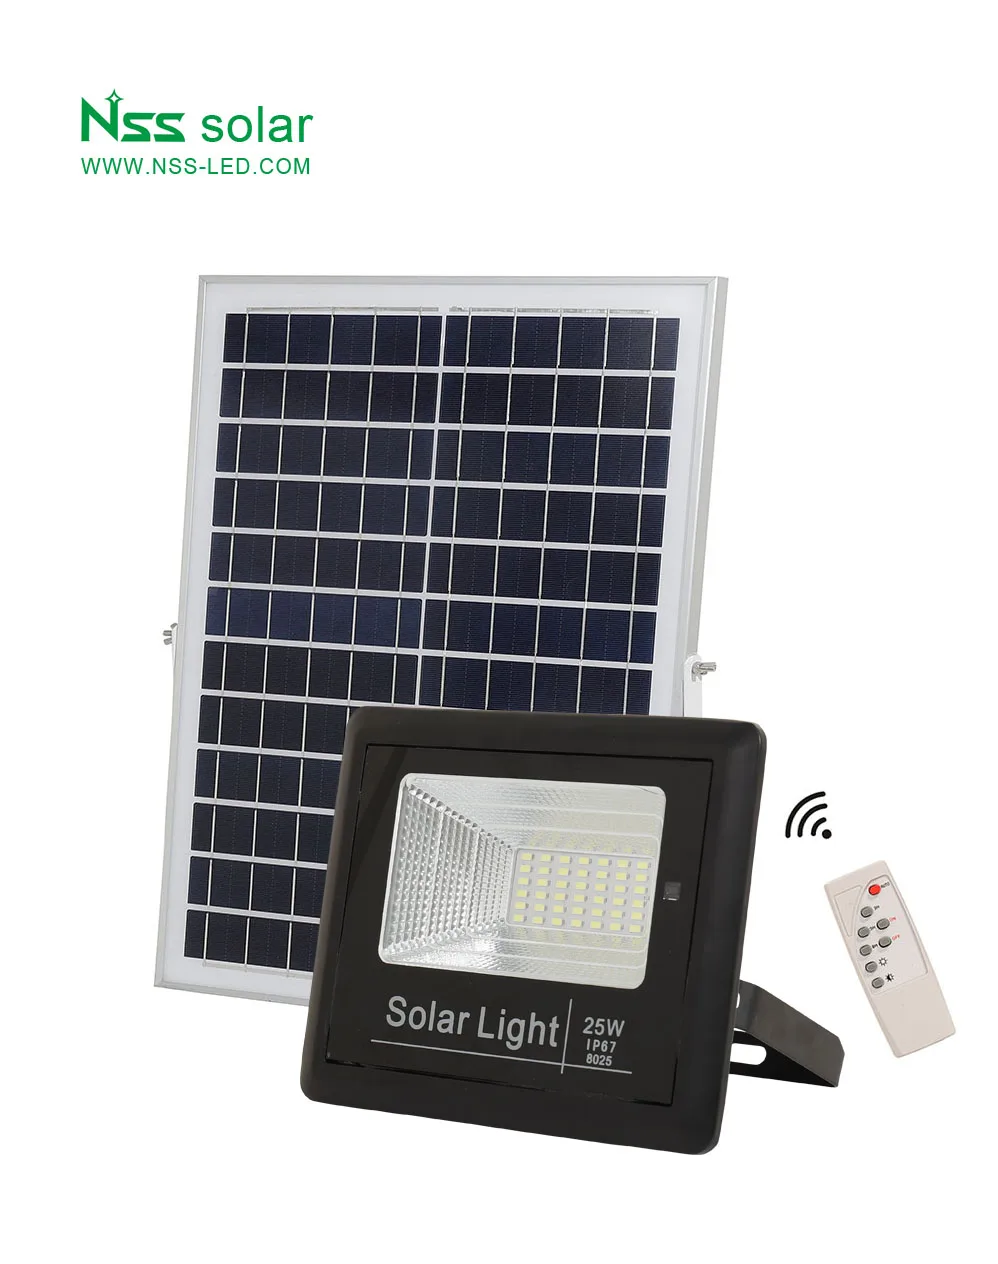 
SL27-A25W 6000K 25W good quality good price IP67 waterproof strong lumen led solar outdoor motion sensor light for park use 